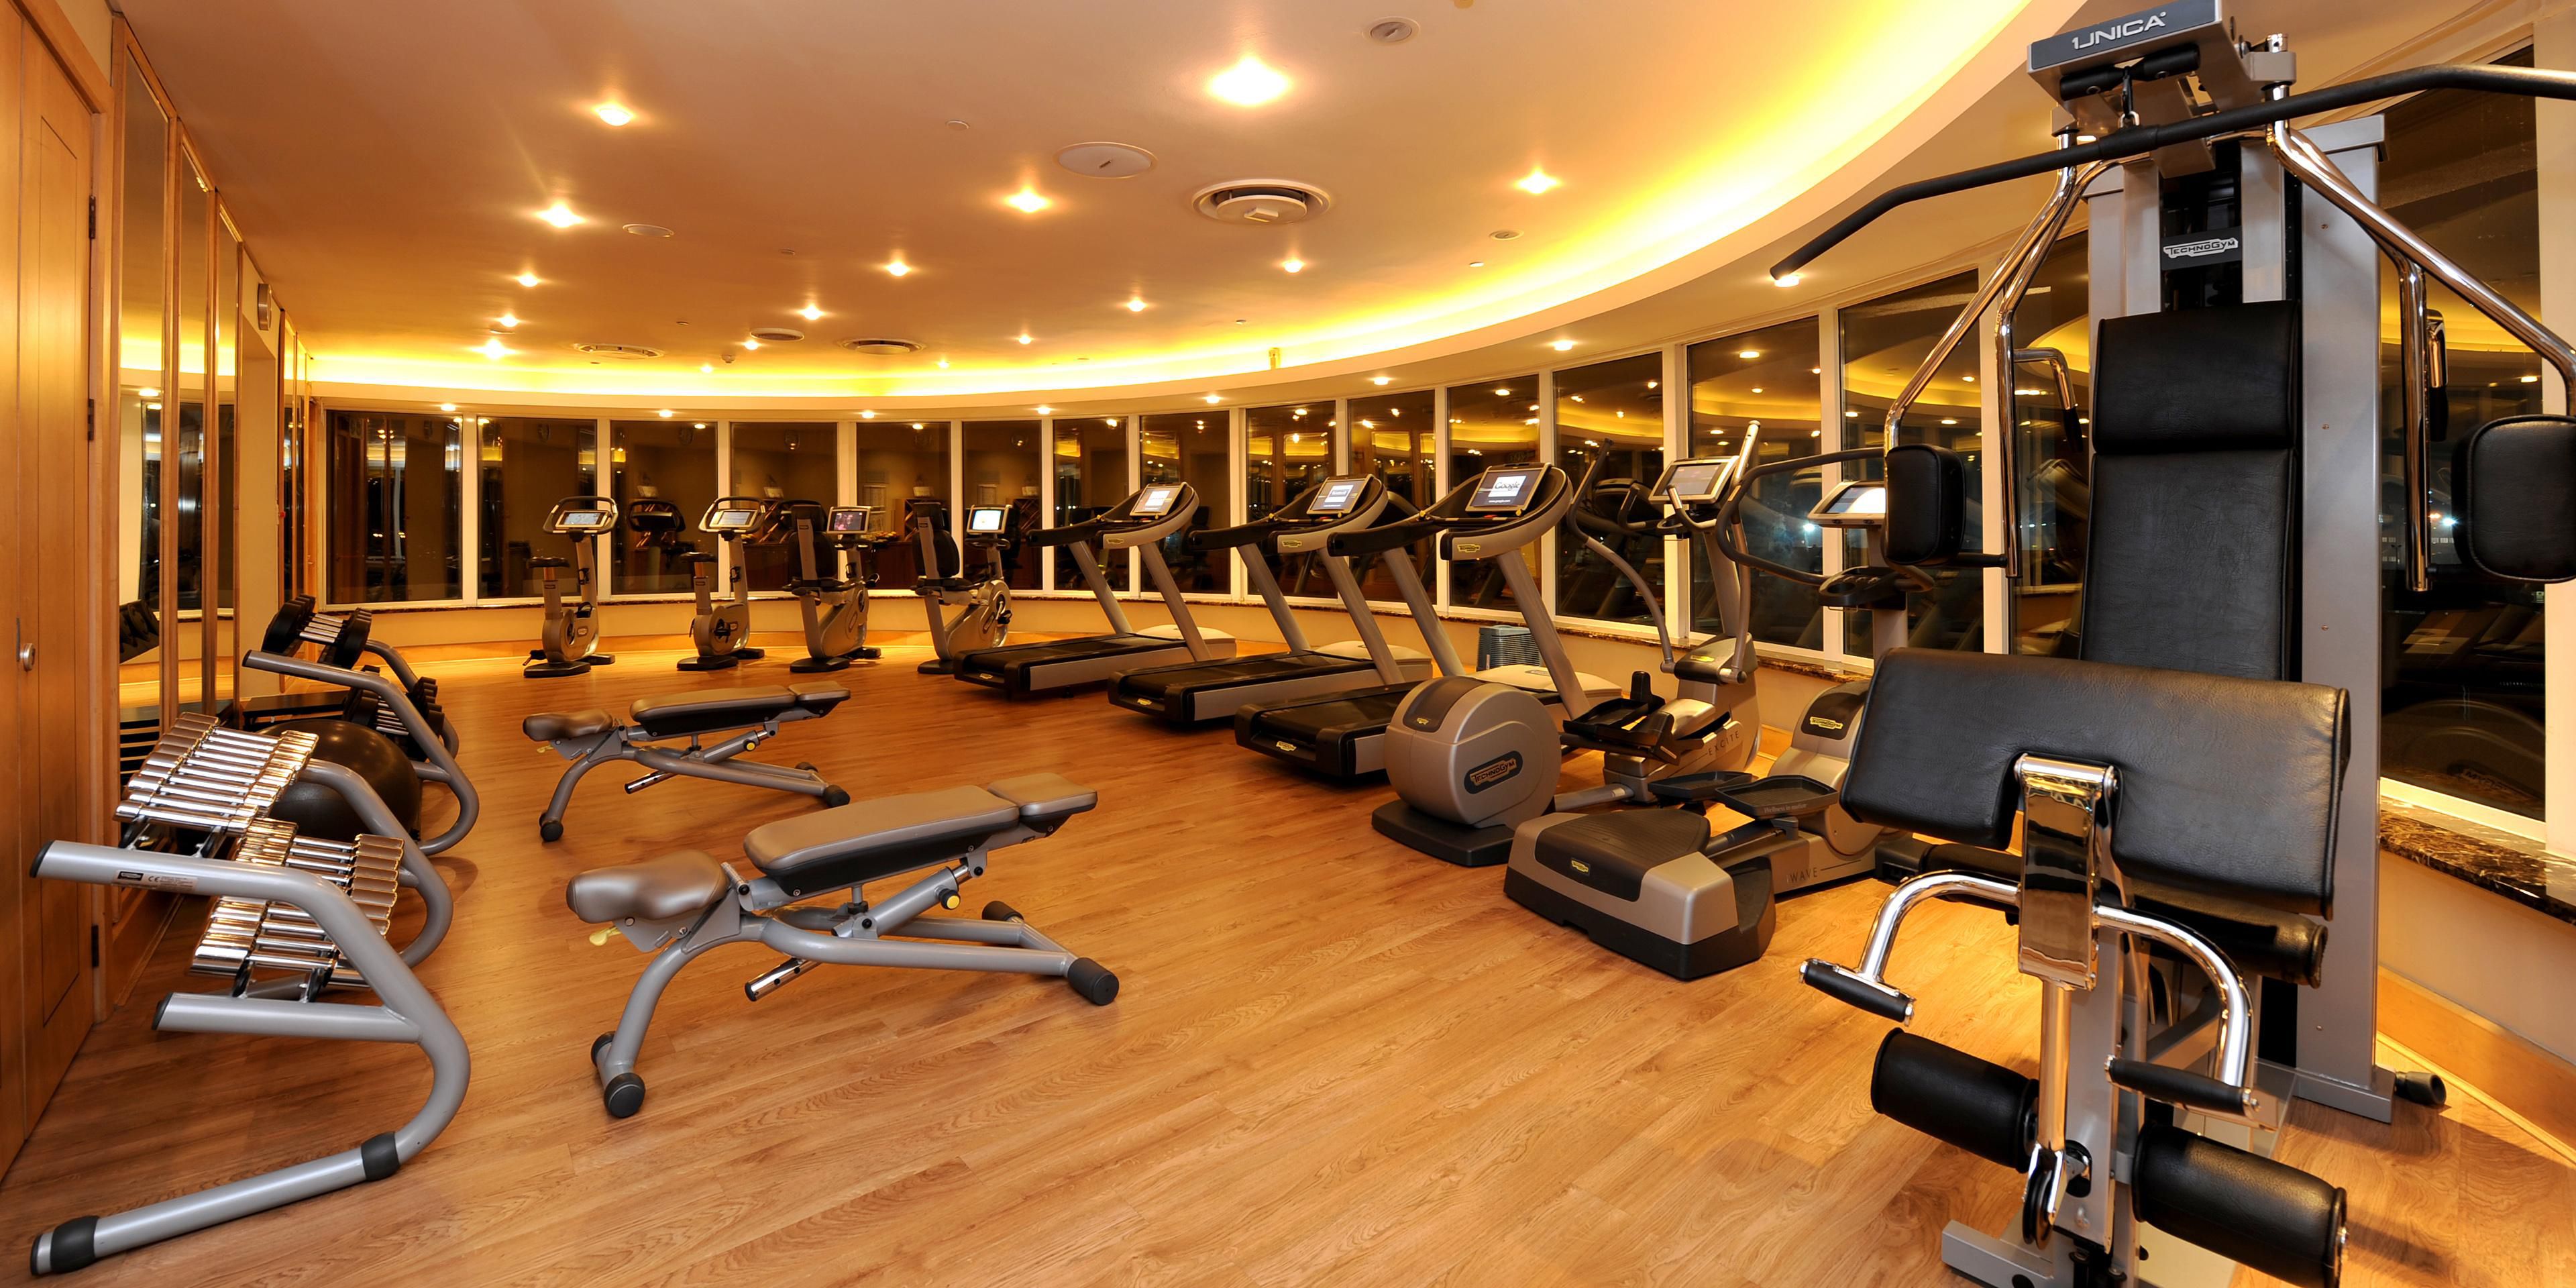 Don't miss a workout at our fitness center, which includes modern Technogym machines. The space is temperature controlled and features full length mirrors, chilled water, gym-towels, and large screen TVs. Located on the top floor of the hotel next to the spa and heated pool, the gym is the perfect place to work out before or after a flight.